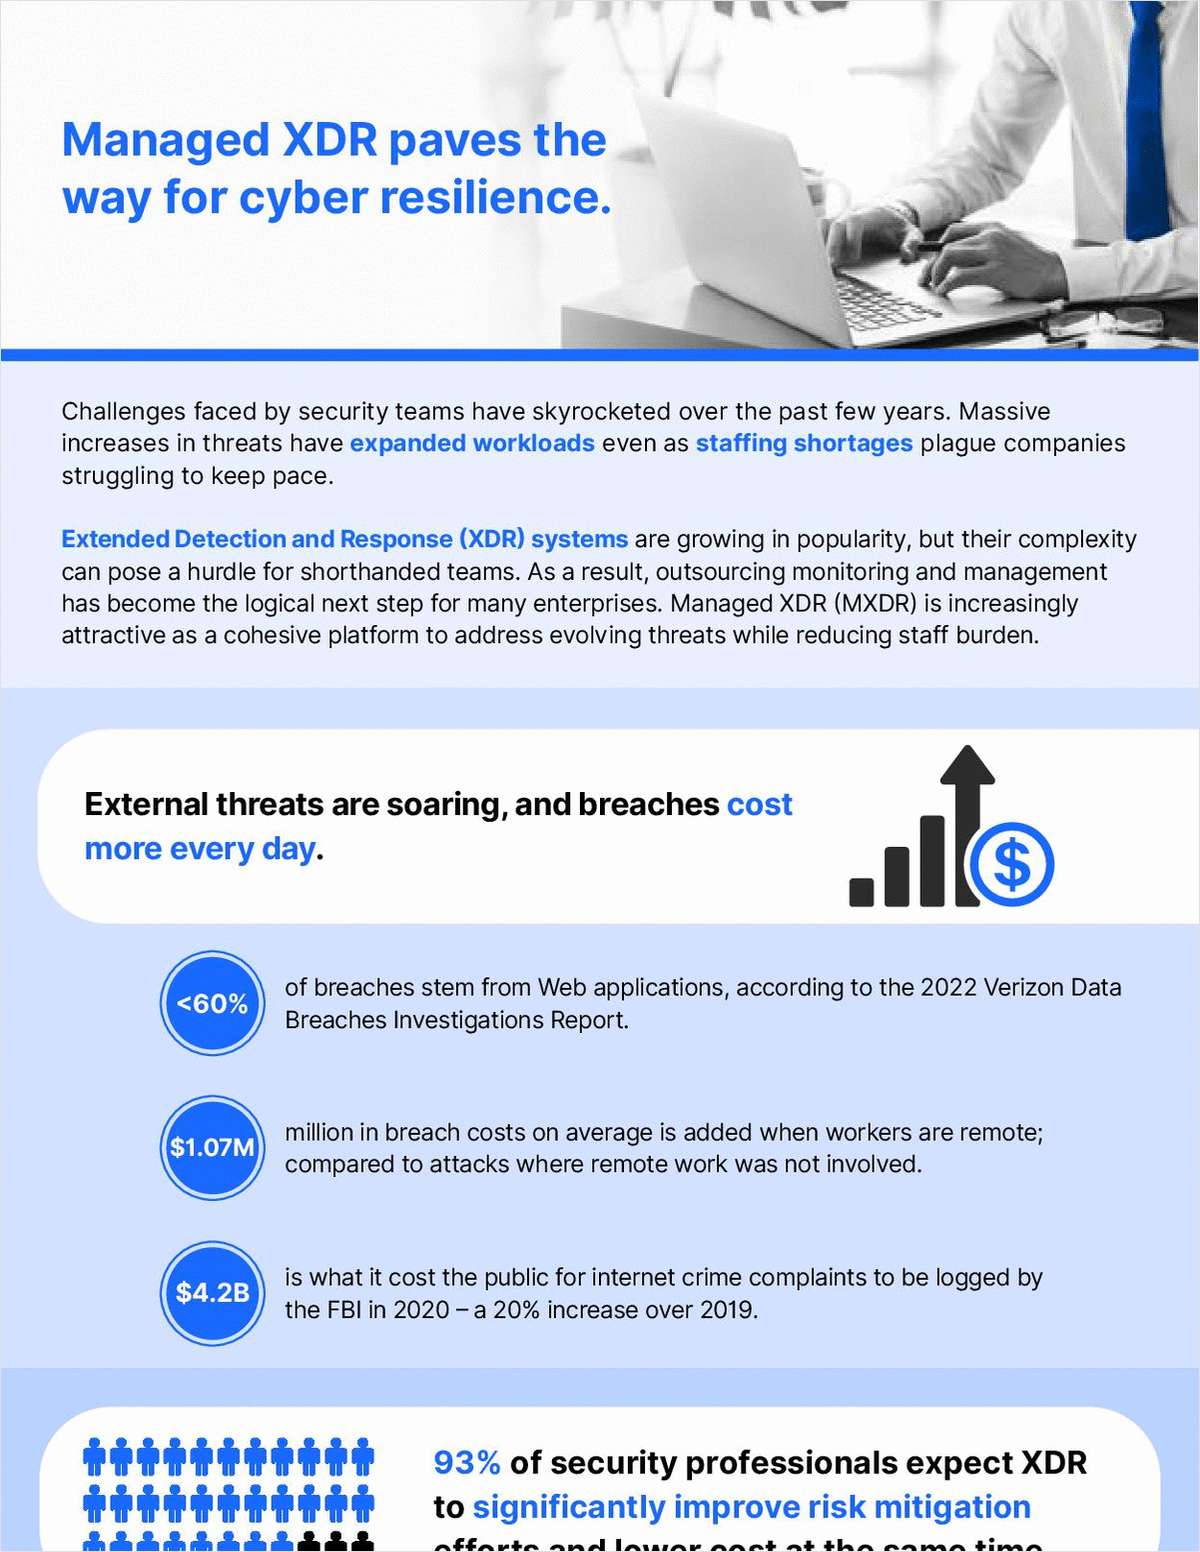 Managed XDR paves the way for cyber resilience